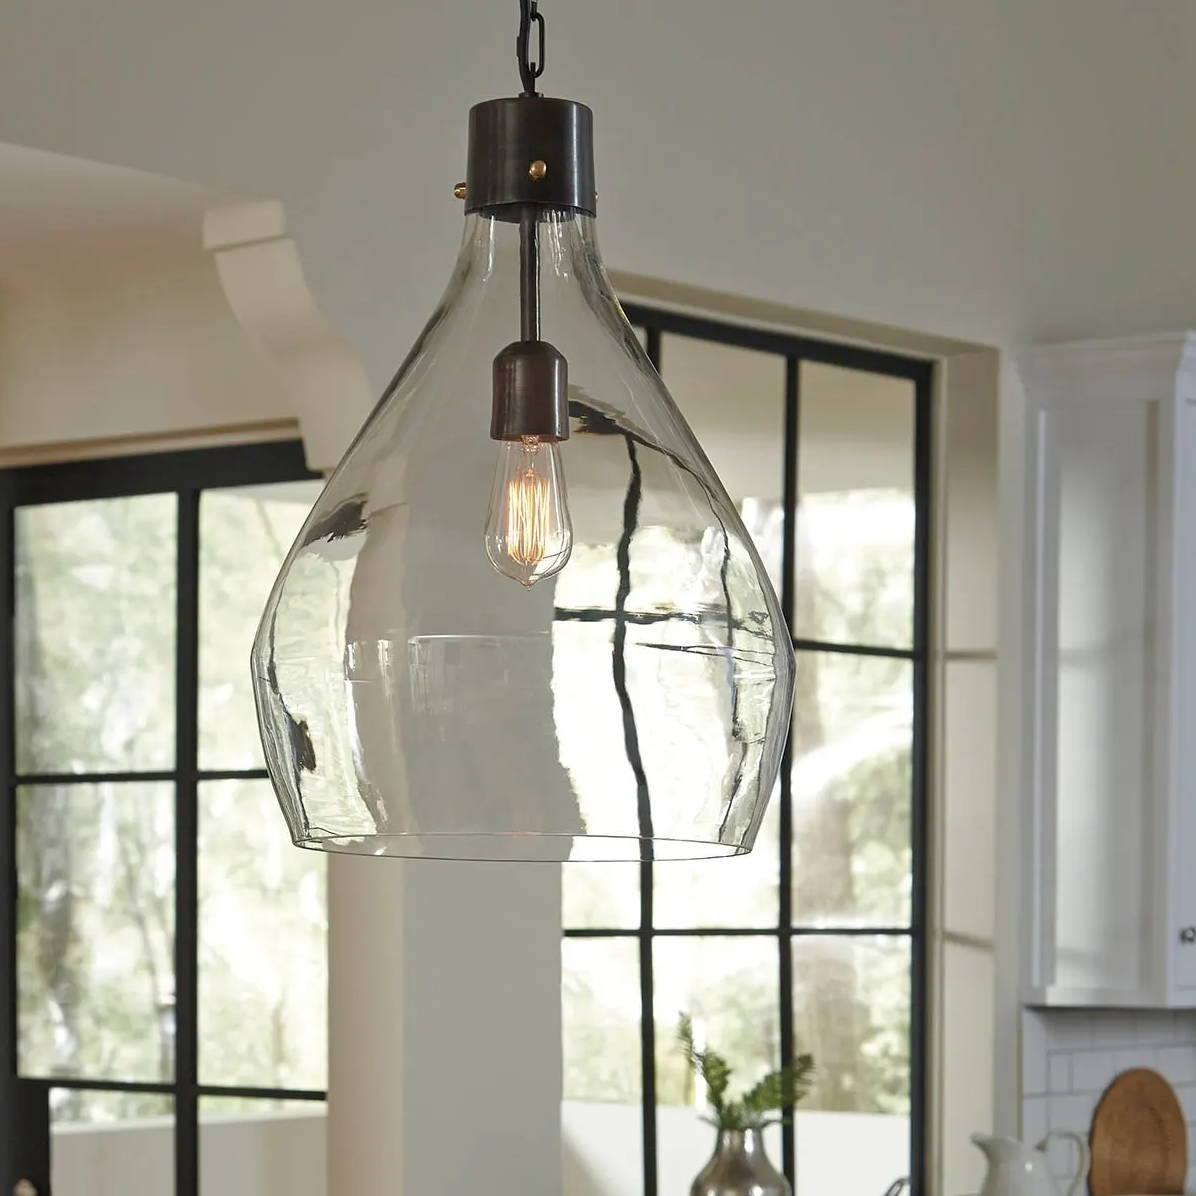 A translucent chandelier with lots of natural light flowing in from a nearby window.